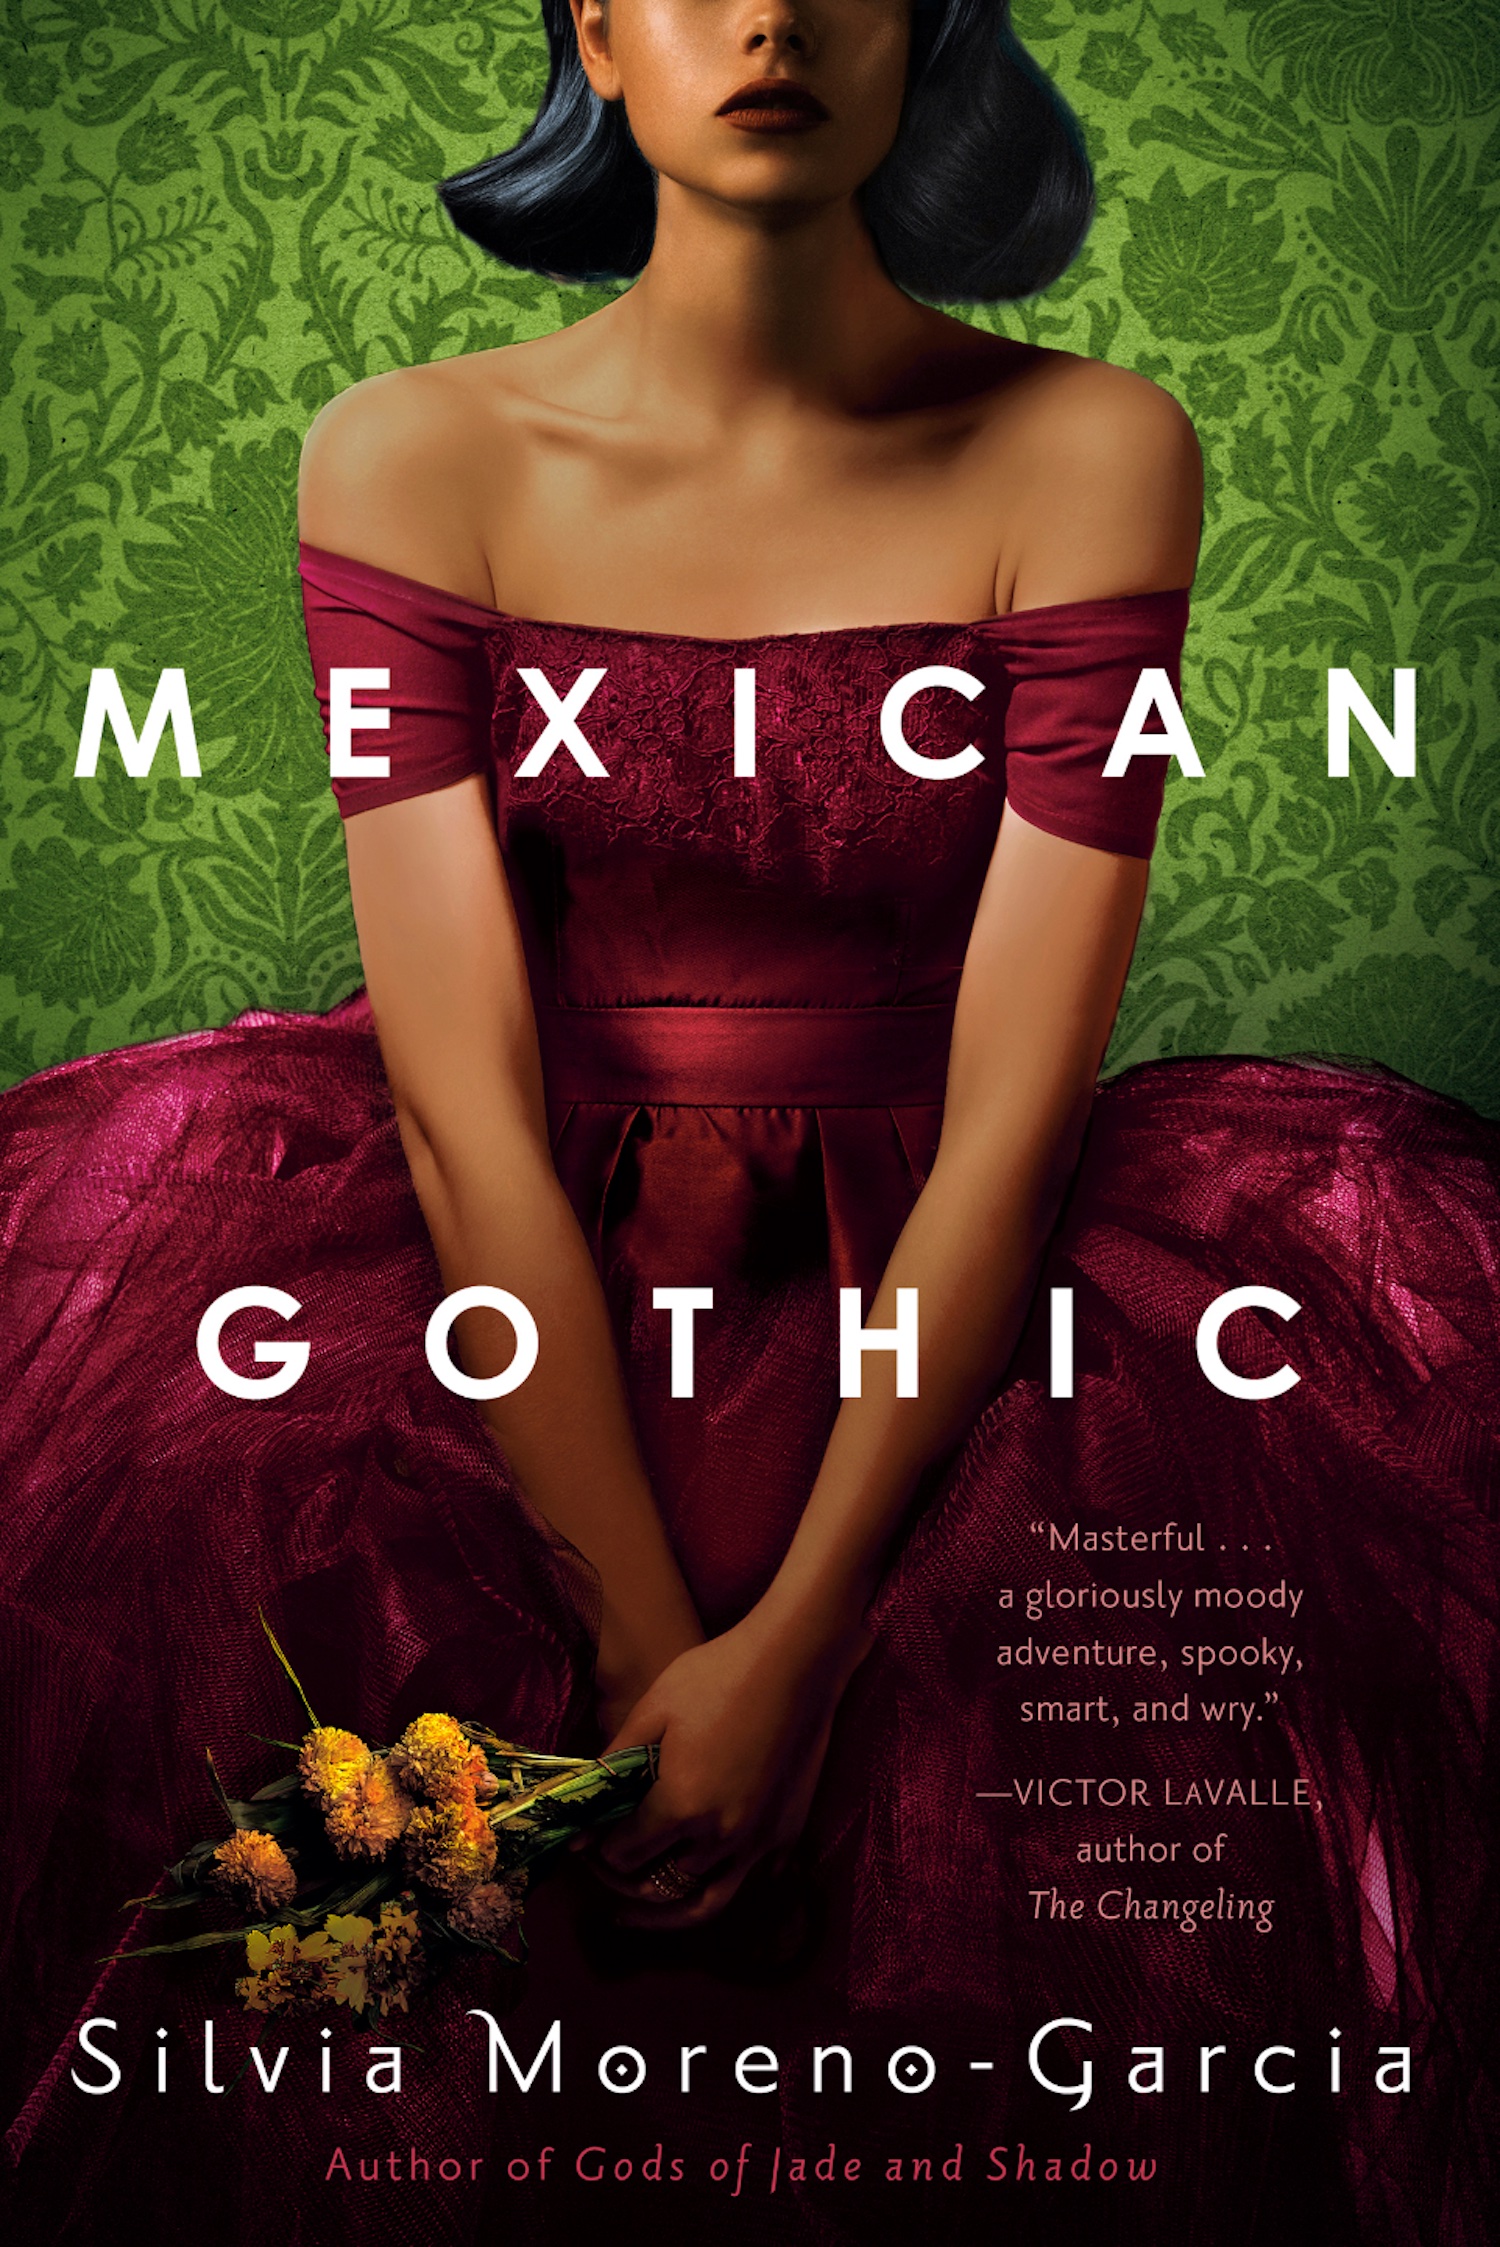 The Ending of Mexican Gothic